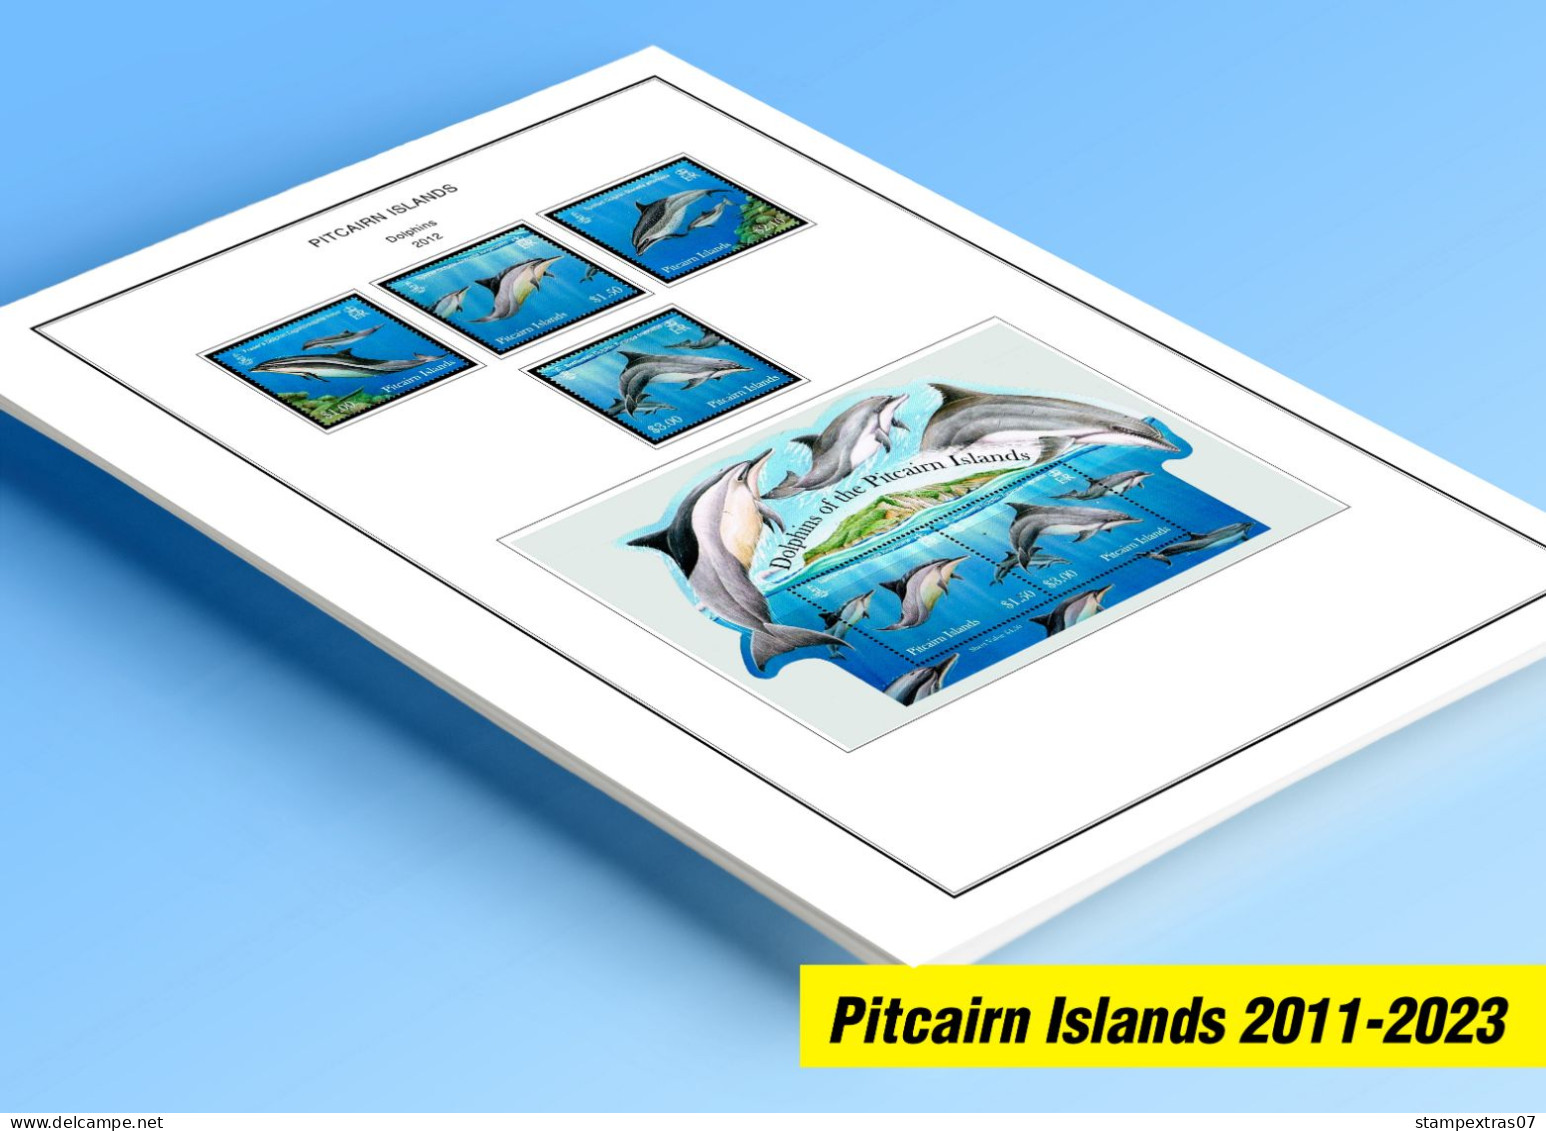 COLOR PRINTED PITCAIRN ISLANDS 2011-2023 STAMP ALBUM PAGES (41 Illustrated Pages) >> FEUILLES ALBUM+++ - Afgedrukte Pagina's